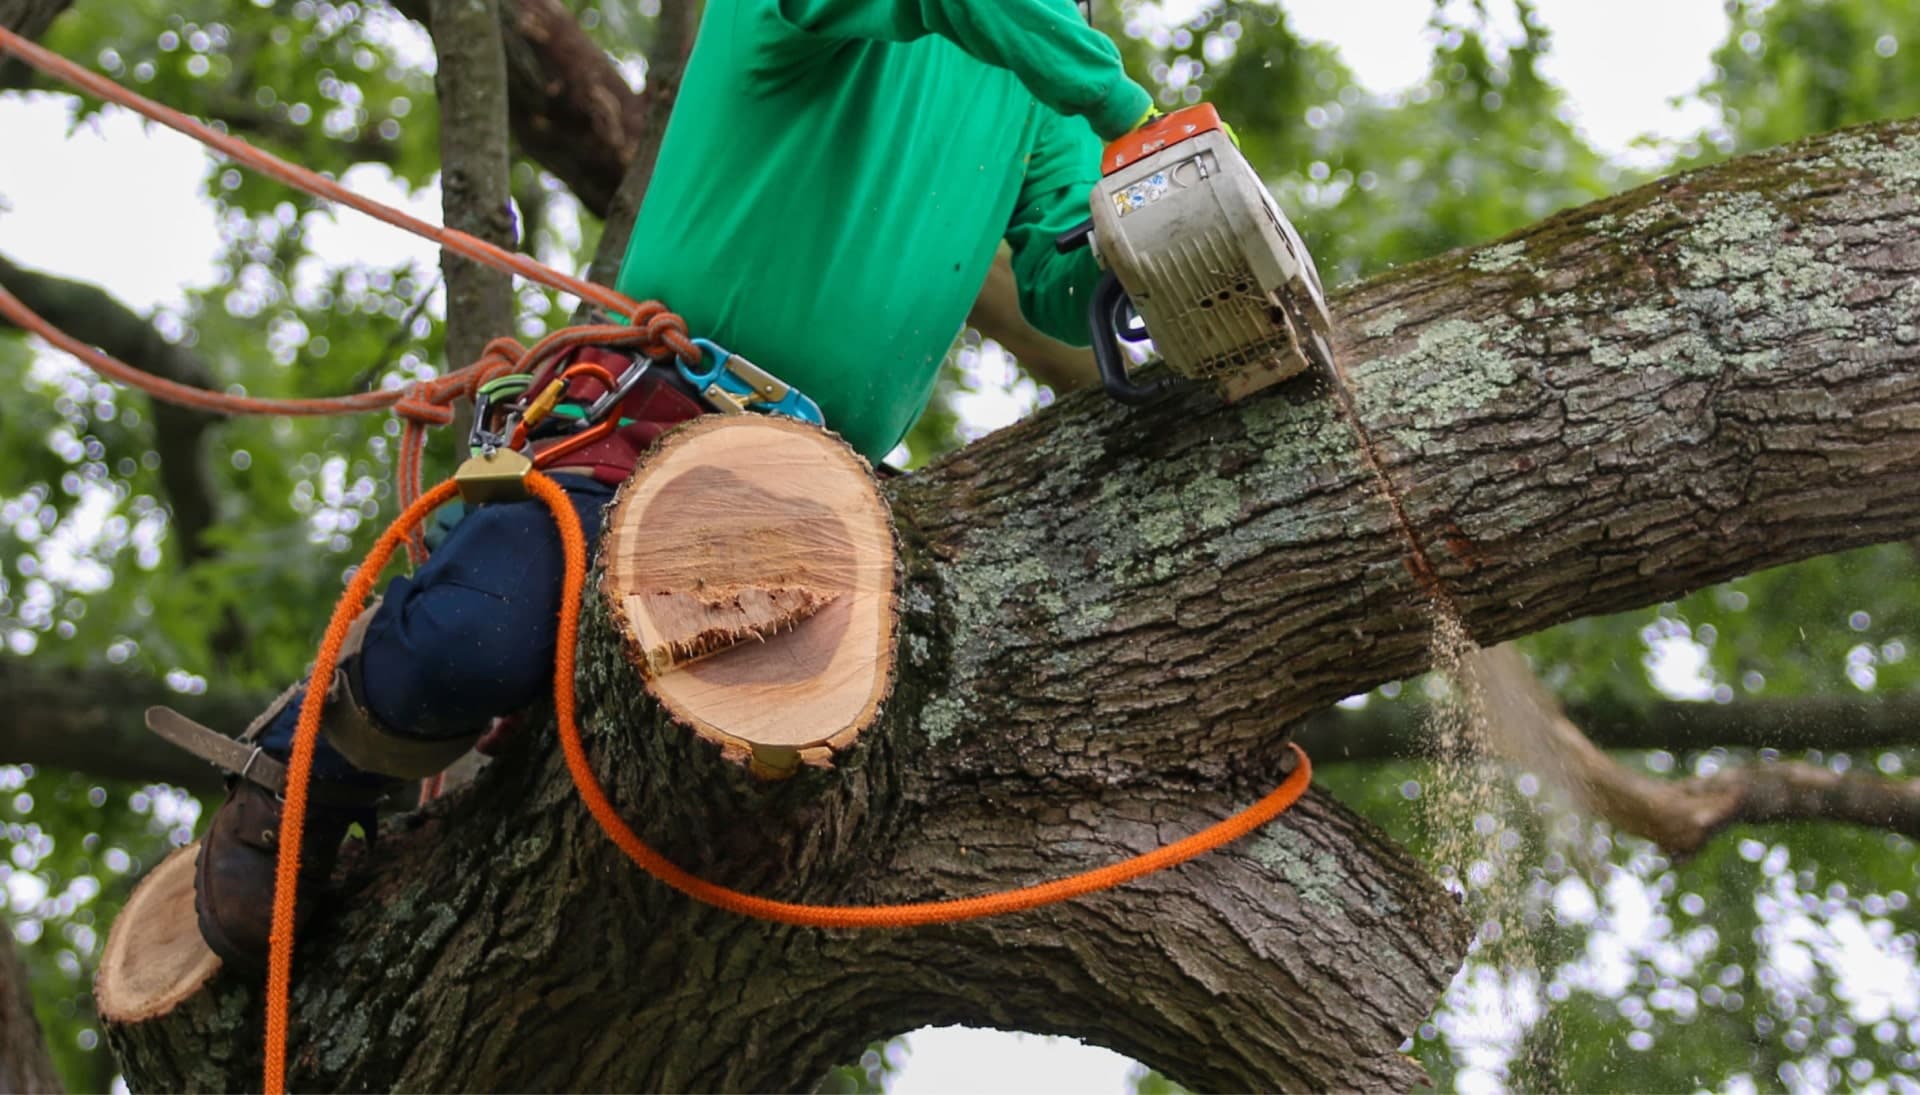 Shed your worries away with best tree removal in Melbourne